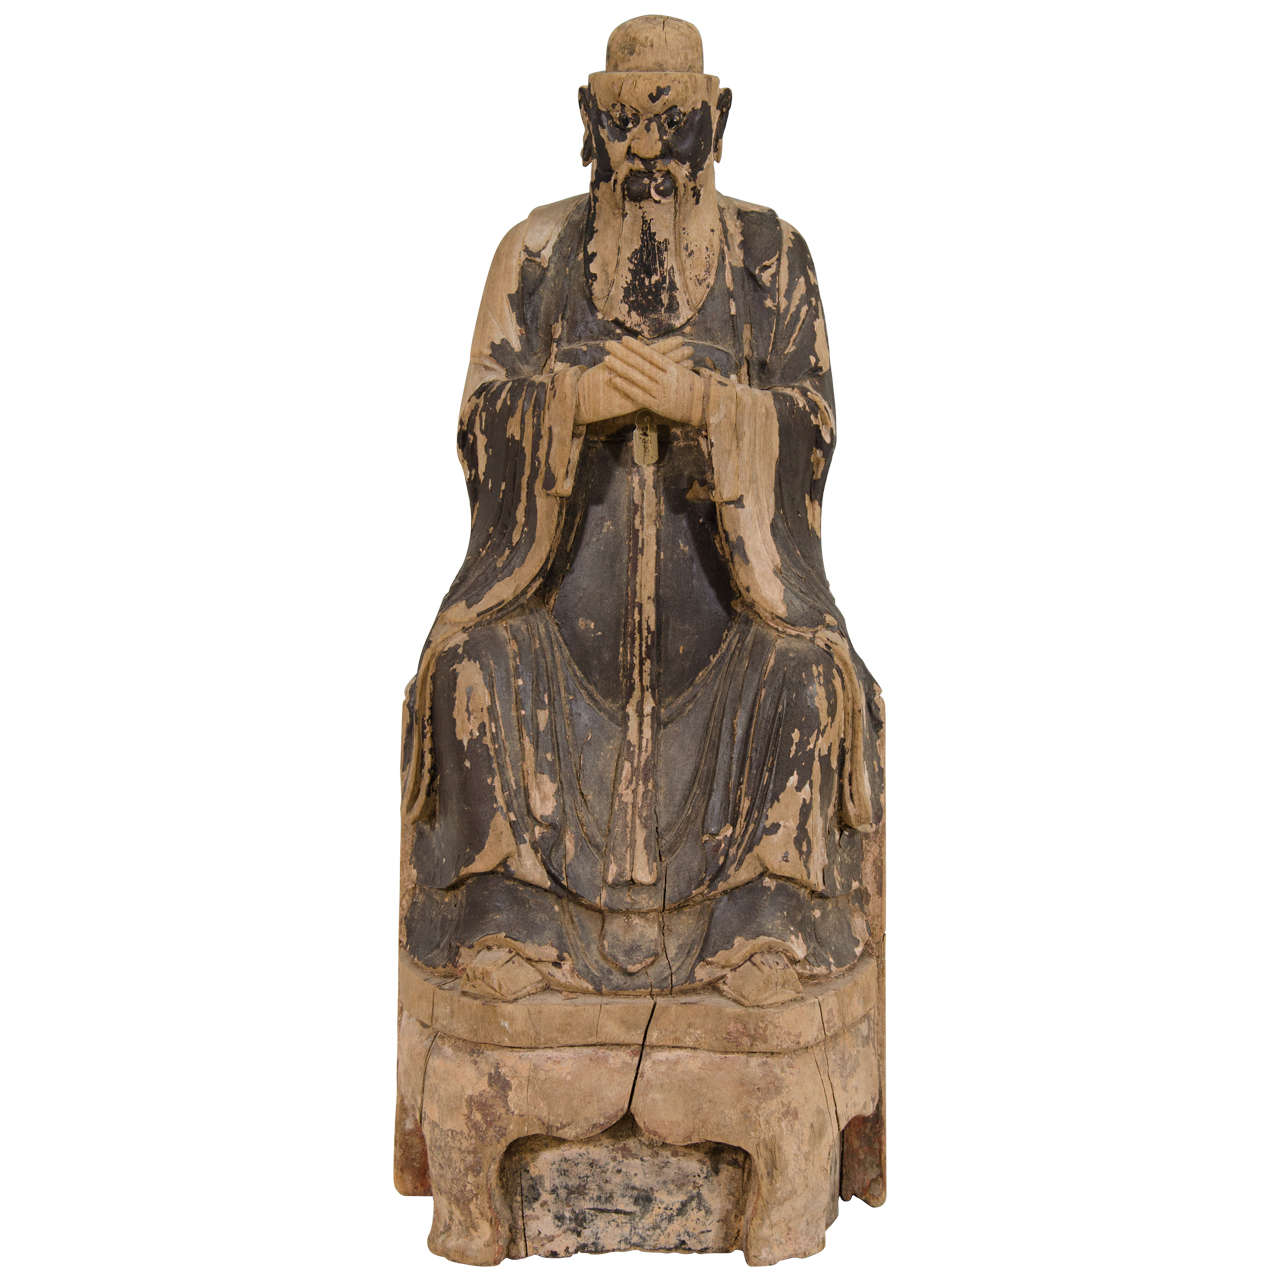 Large Ming Dynasty Wooden Sculpture of a Taoist Figure